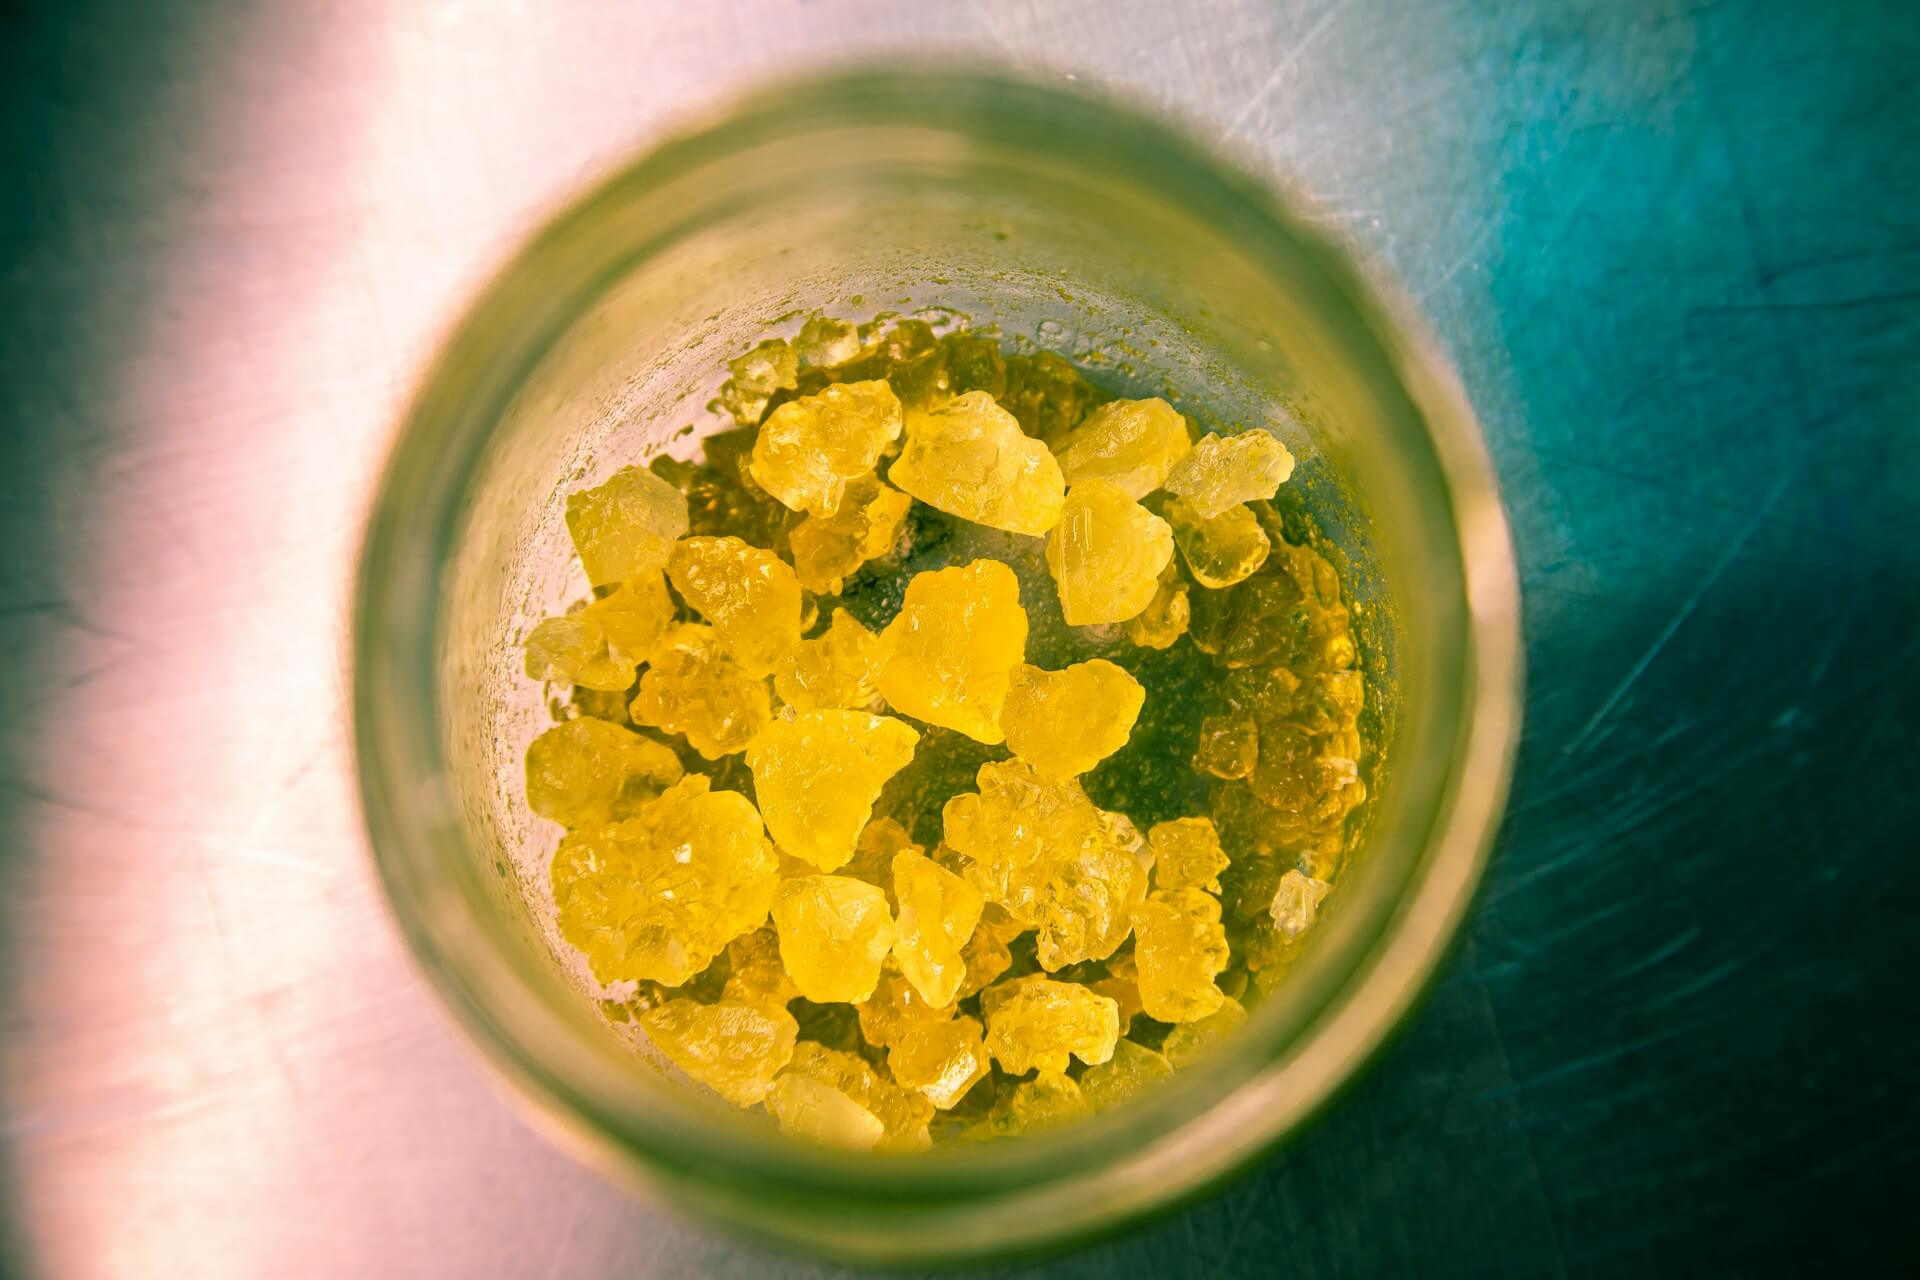 Glass of cannabis concentrate illustrating differences of shatter vs wax